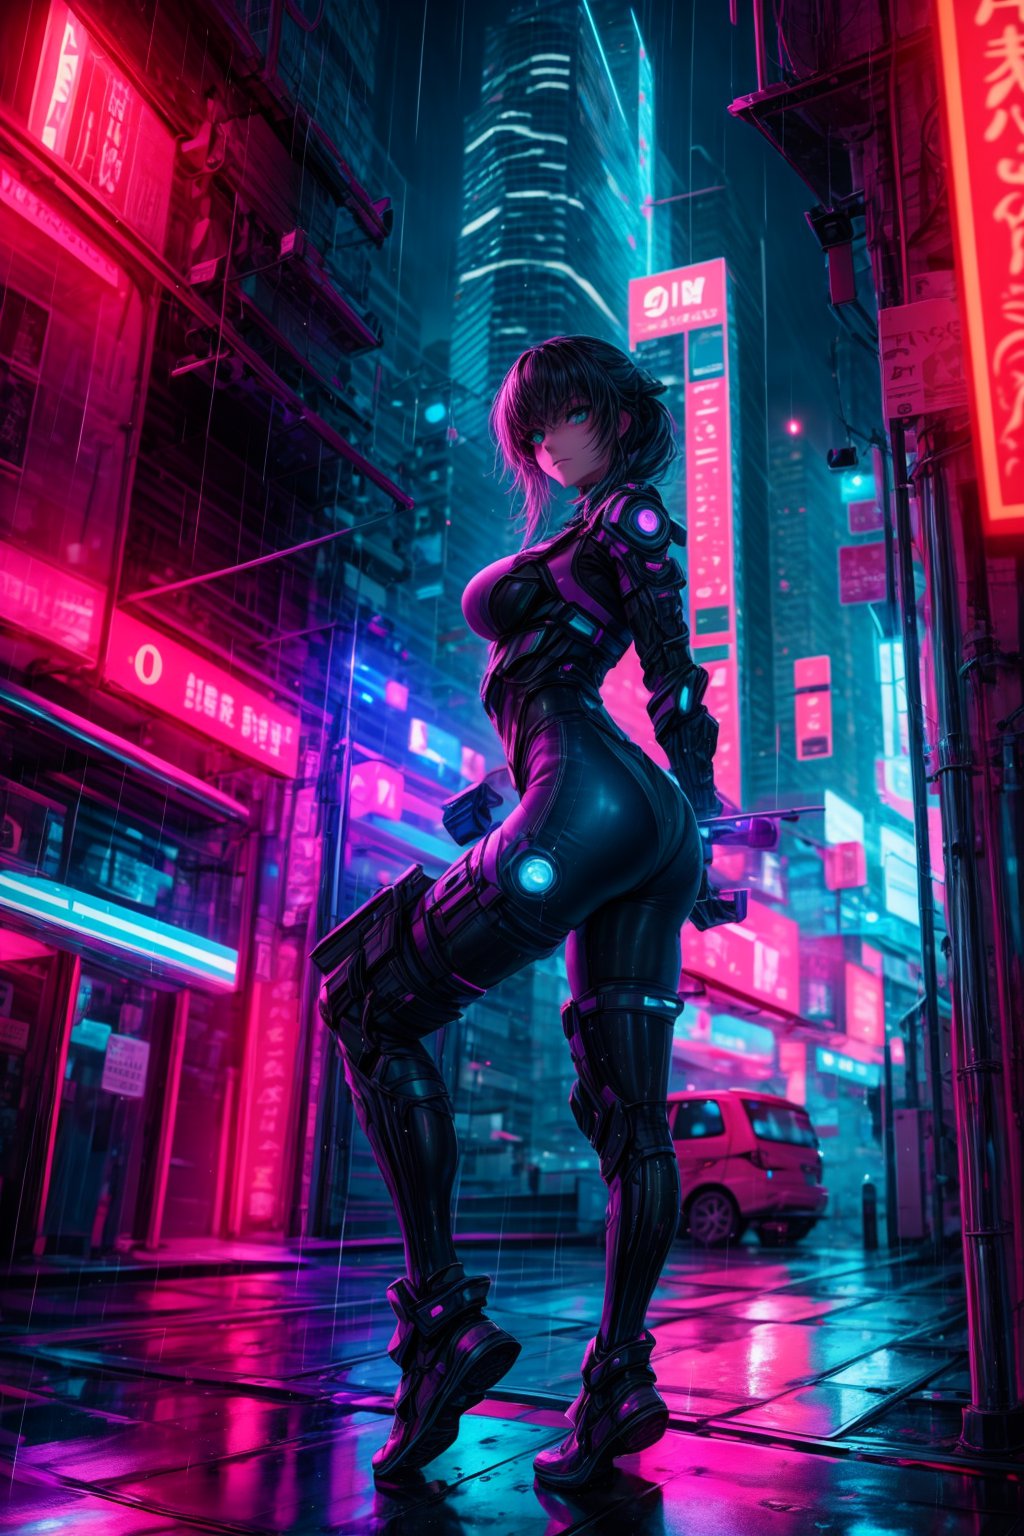 A futuristic, dark atmosphere prevails as a mysterious girl from the future, her body reinforced with plasma, effortlessly swings from building to building using electricity. The rainy night sky is illuminated by light particles and electric sparks, casting an otherworldly glow on the fascinating city skyline. Her cyberpunk clothing style glistens in the dim light, perfectly framed against the urban landscape as she assumes a dynamic pose, her movements seemingly defying gravity.